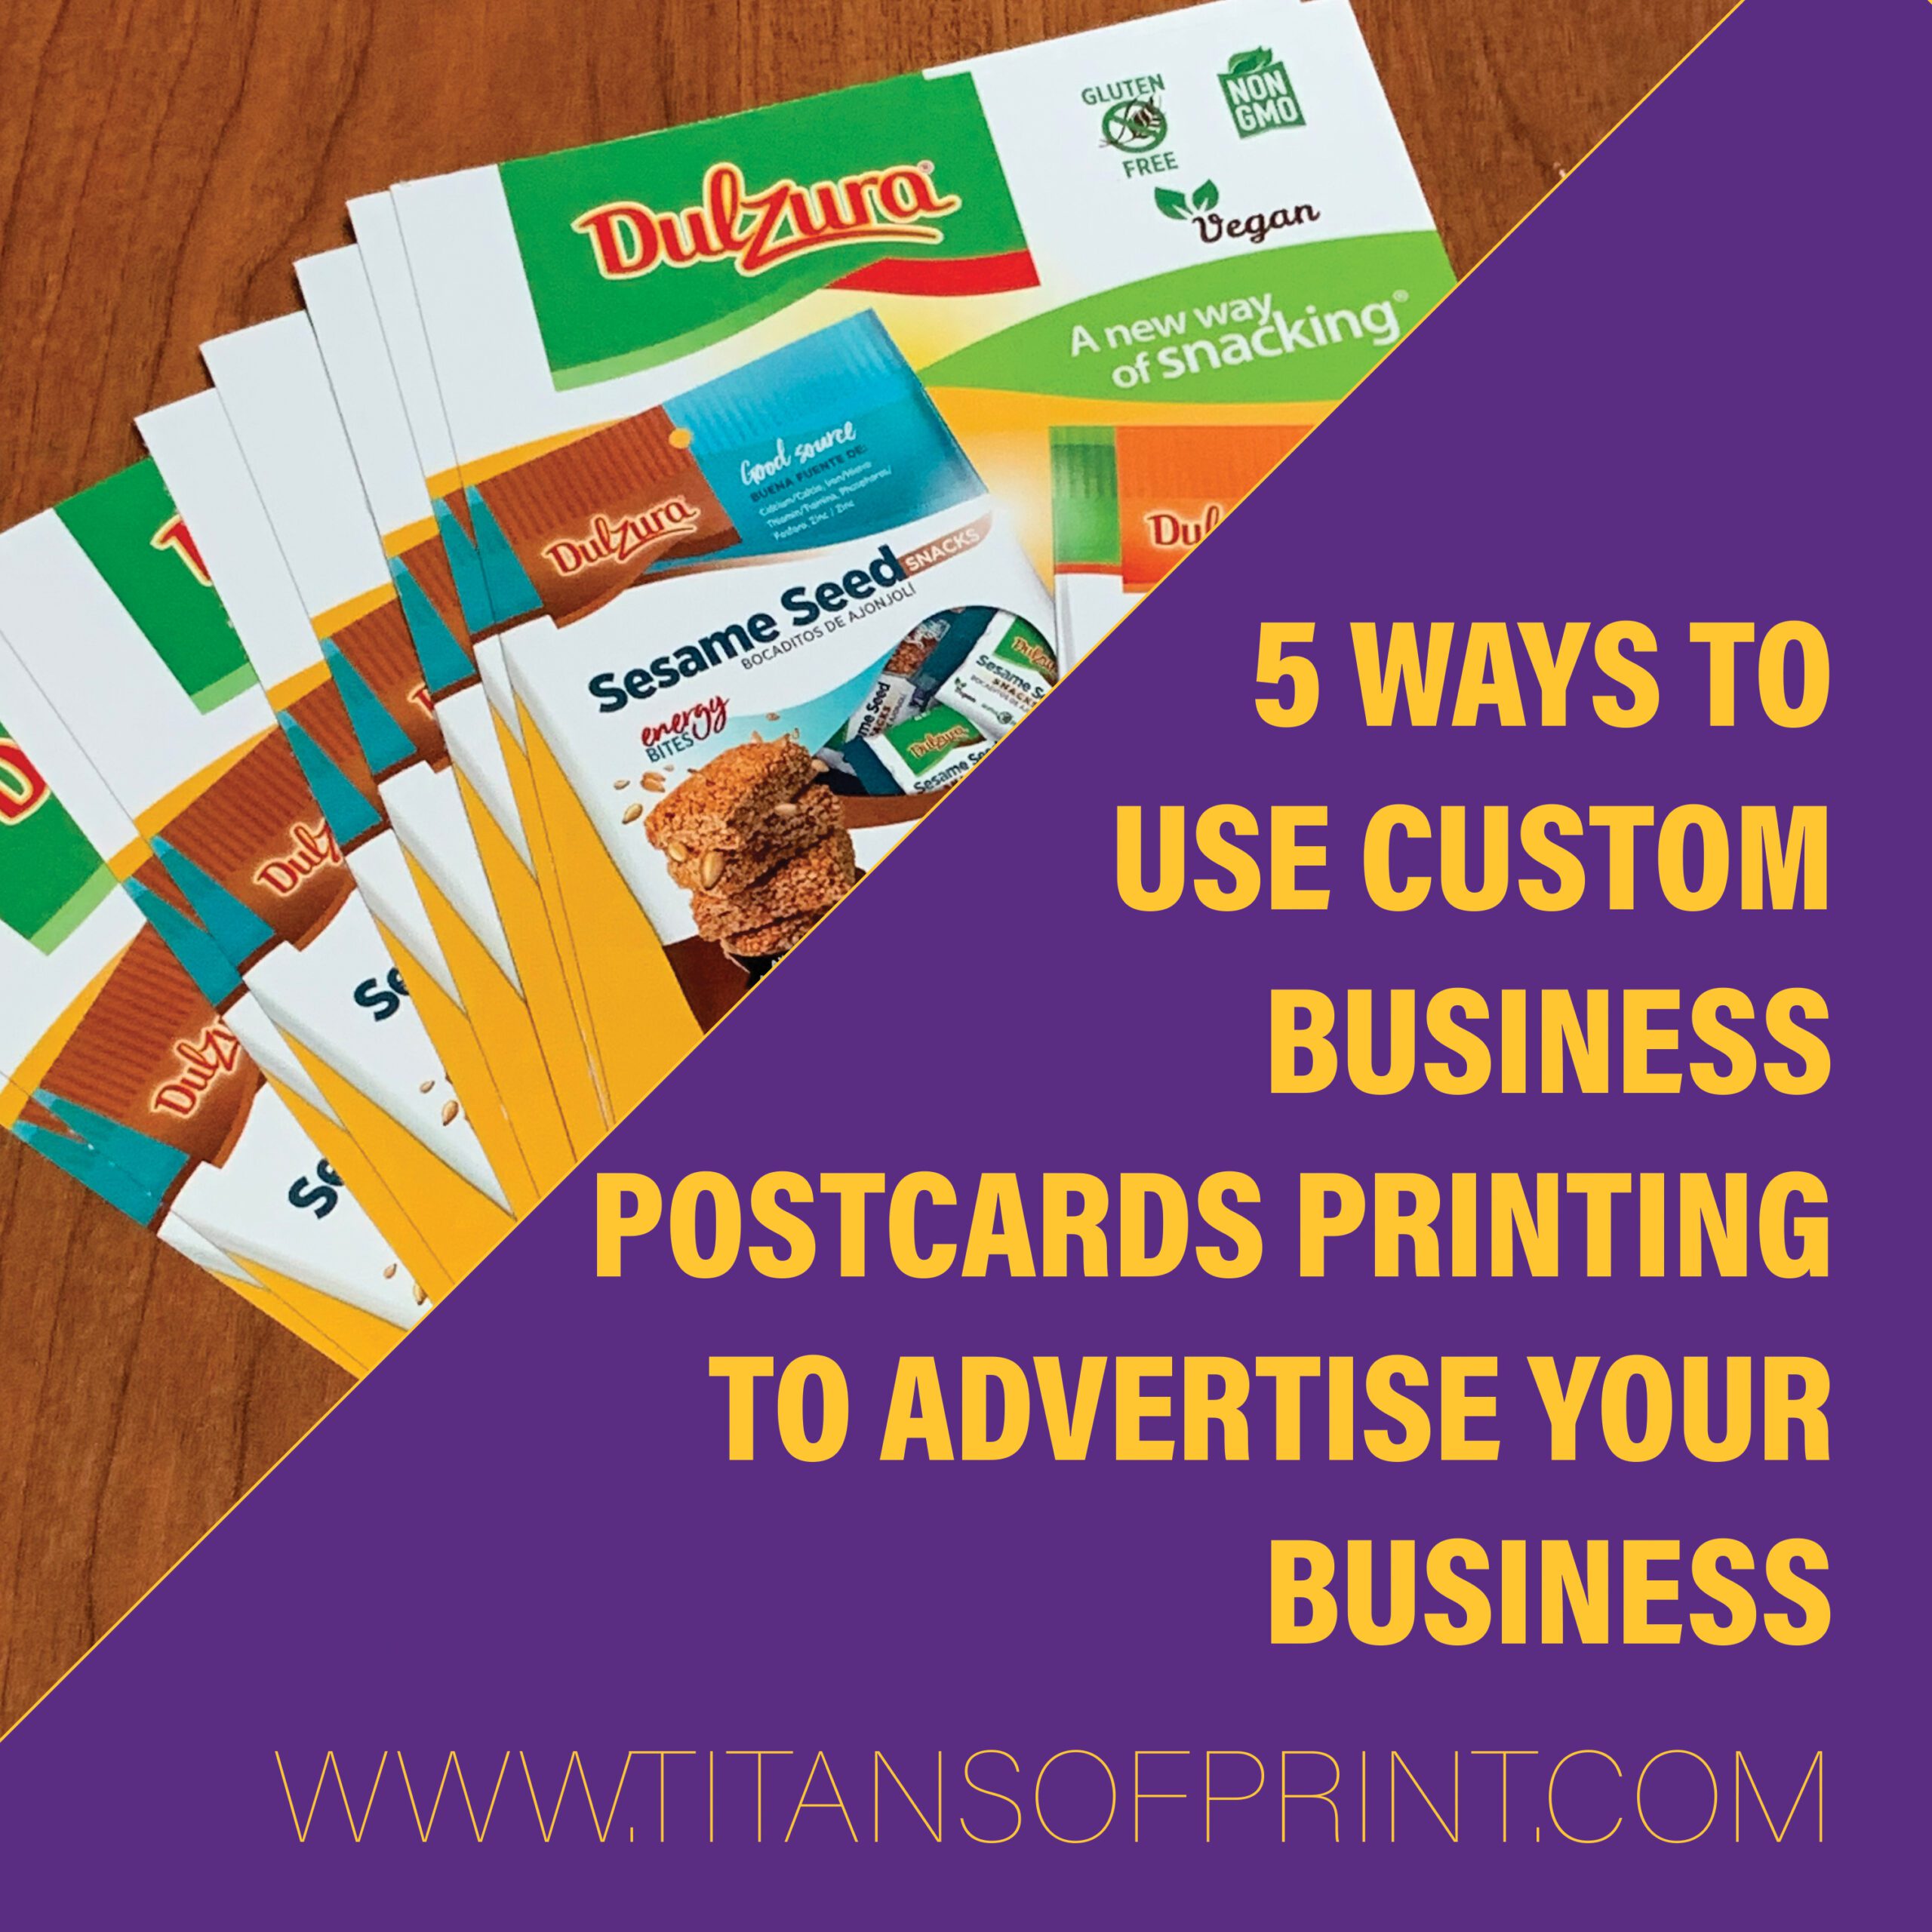 5 Ways To Use Custom Business Postcards Printing To Advertise Your Business